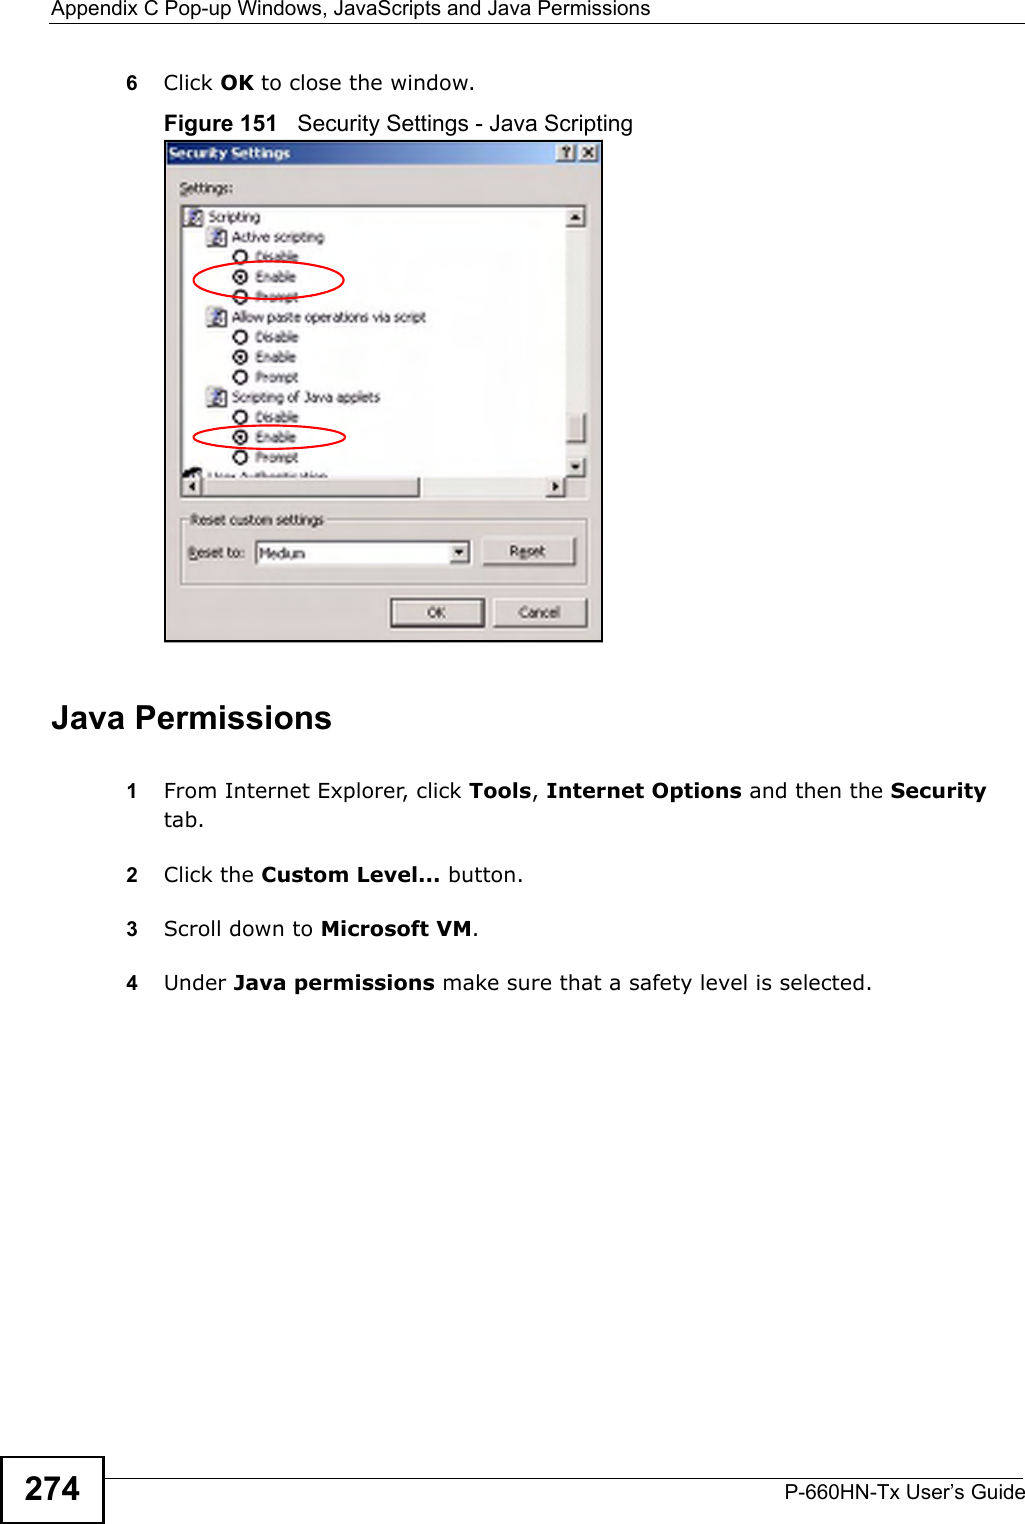 Appendix C Pop-up Windows, JavaScripts and Java PermissionsP-660HN-Tx User’s Guide2746Click OK to close the window.Figure 151   Security Settings - Java ScriptingJava Permissions1From Internet Explorer, click Tools, Internet Options and then the Security tab. 2Click the Custom Level... button. 3Scroll down to Microsoft VM. 4Under Java permissions make sure that a safety level is selected.